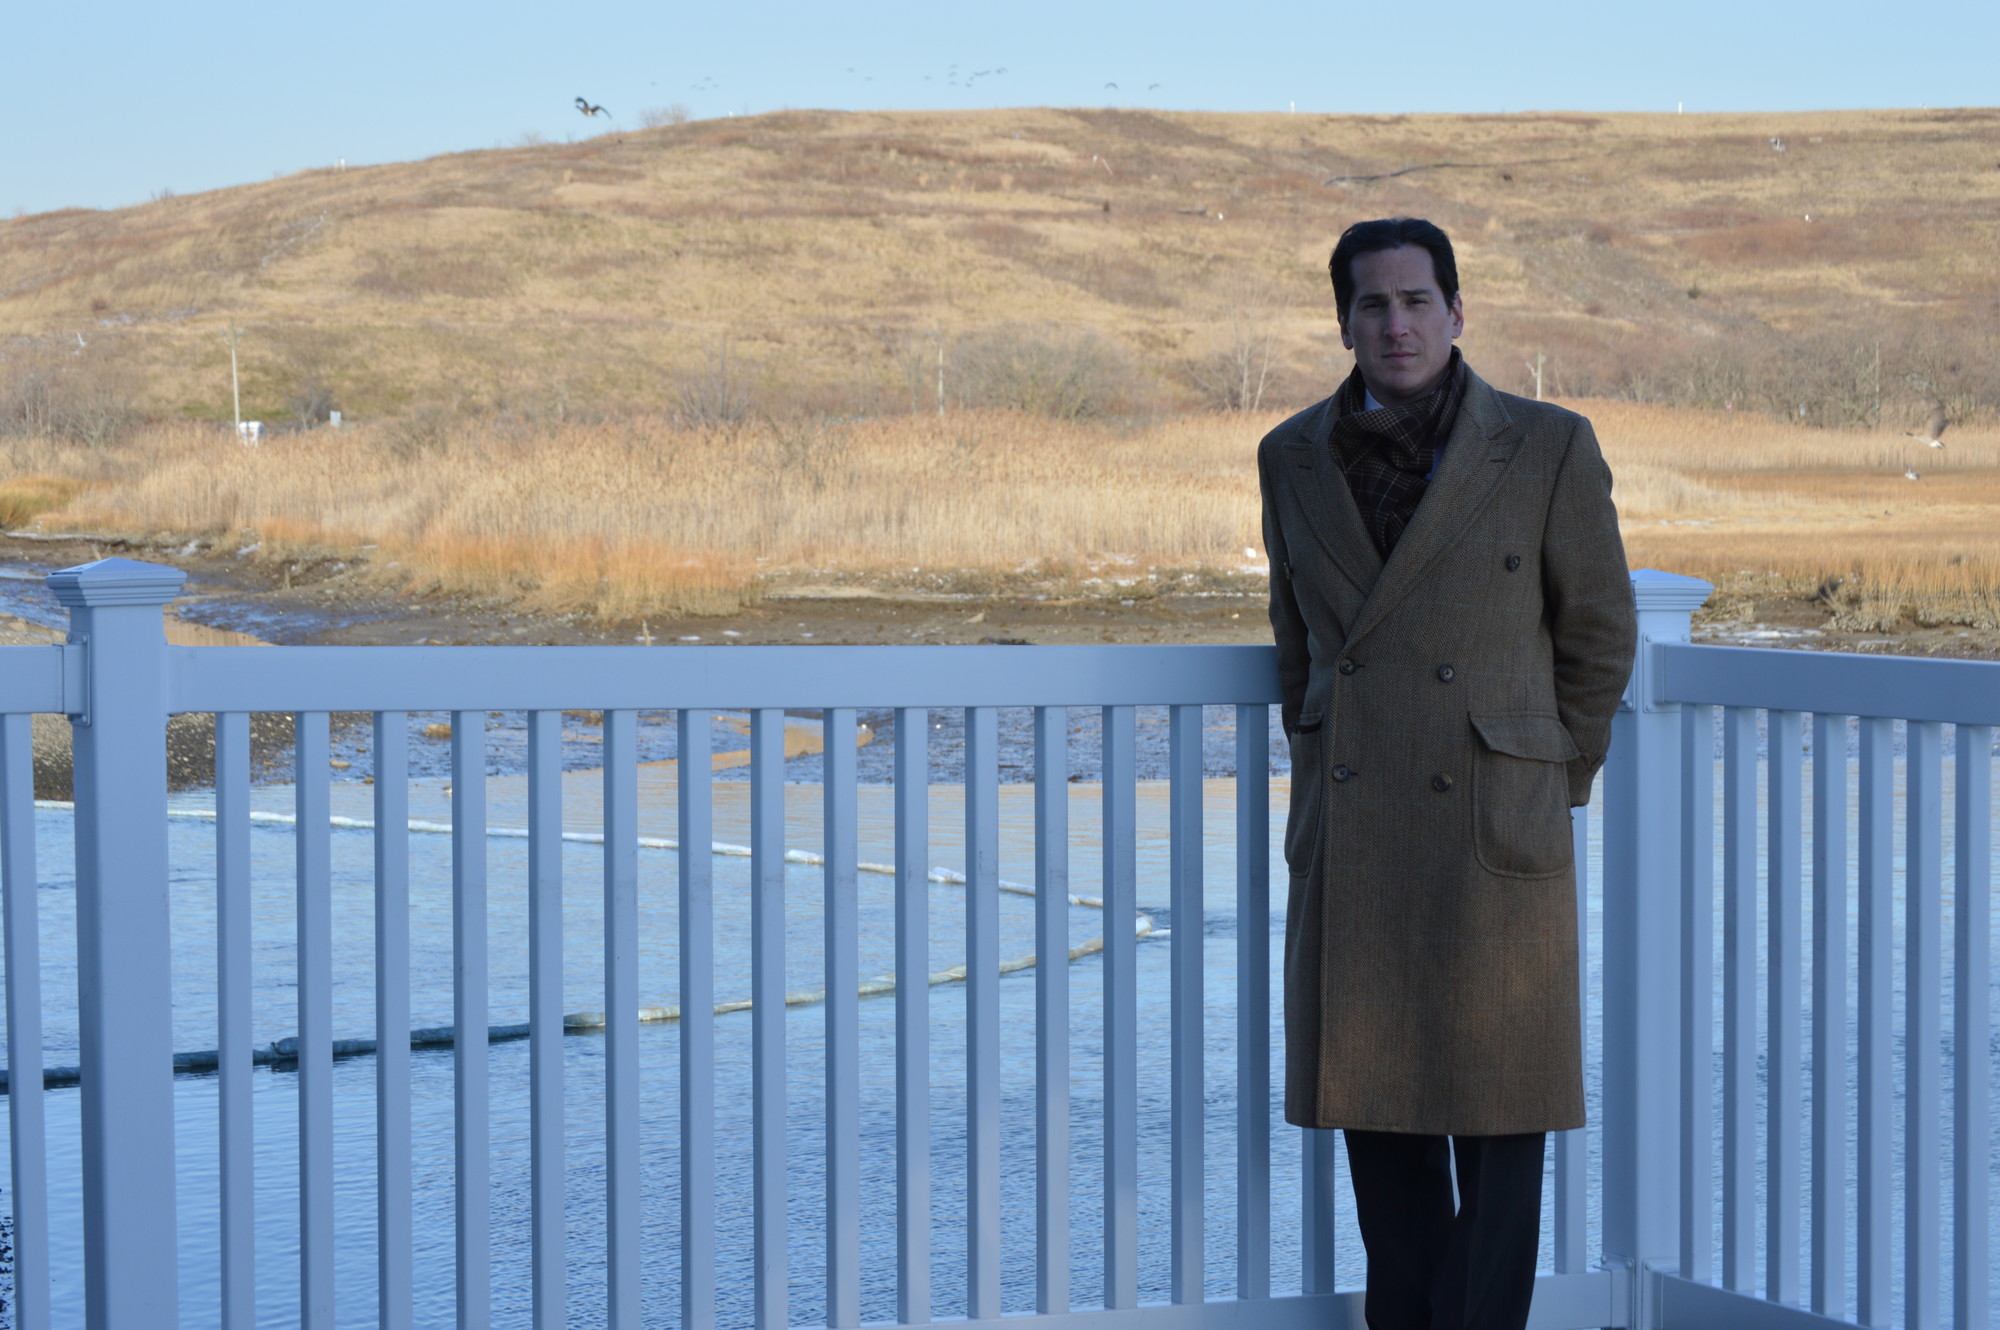 State Assemblyman Todd Kaminsky inspected the area where dead fish were found floating in the waters around Barnum Island.